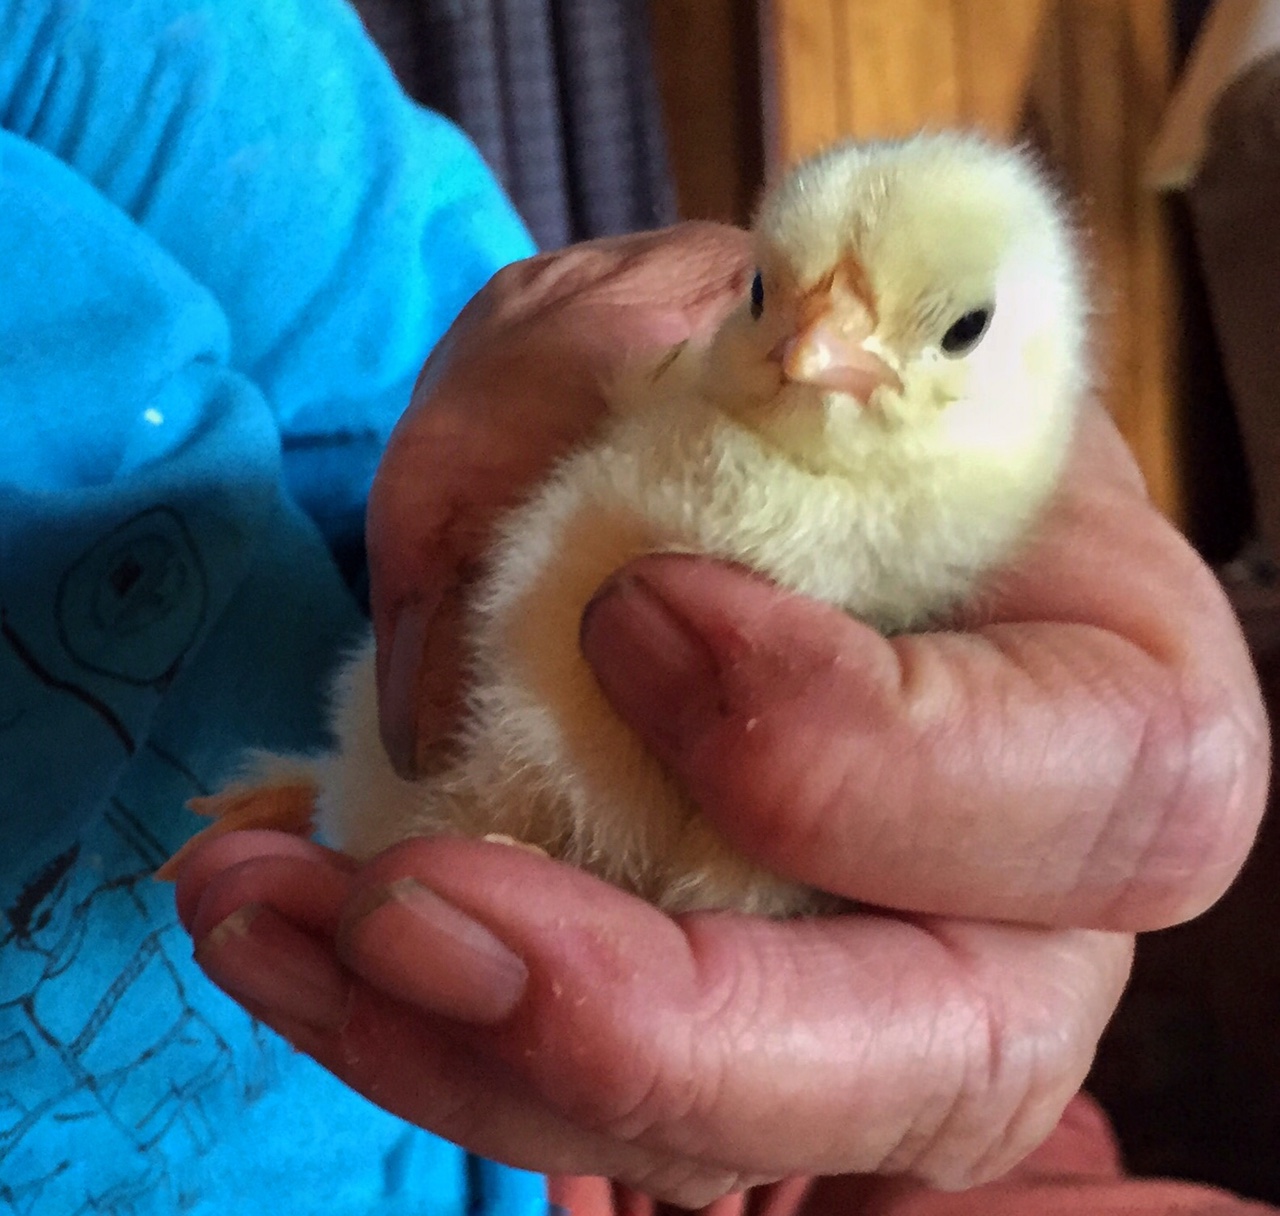 One of the chicks born just hours before at L&M Farm. (WTOP/Kate Ryan)